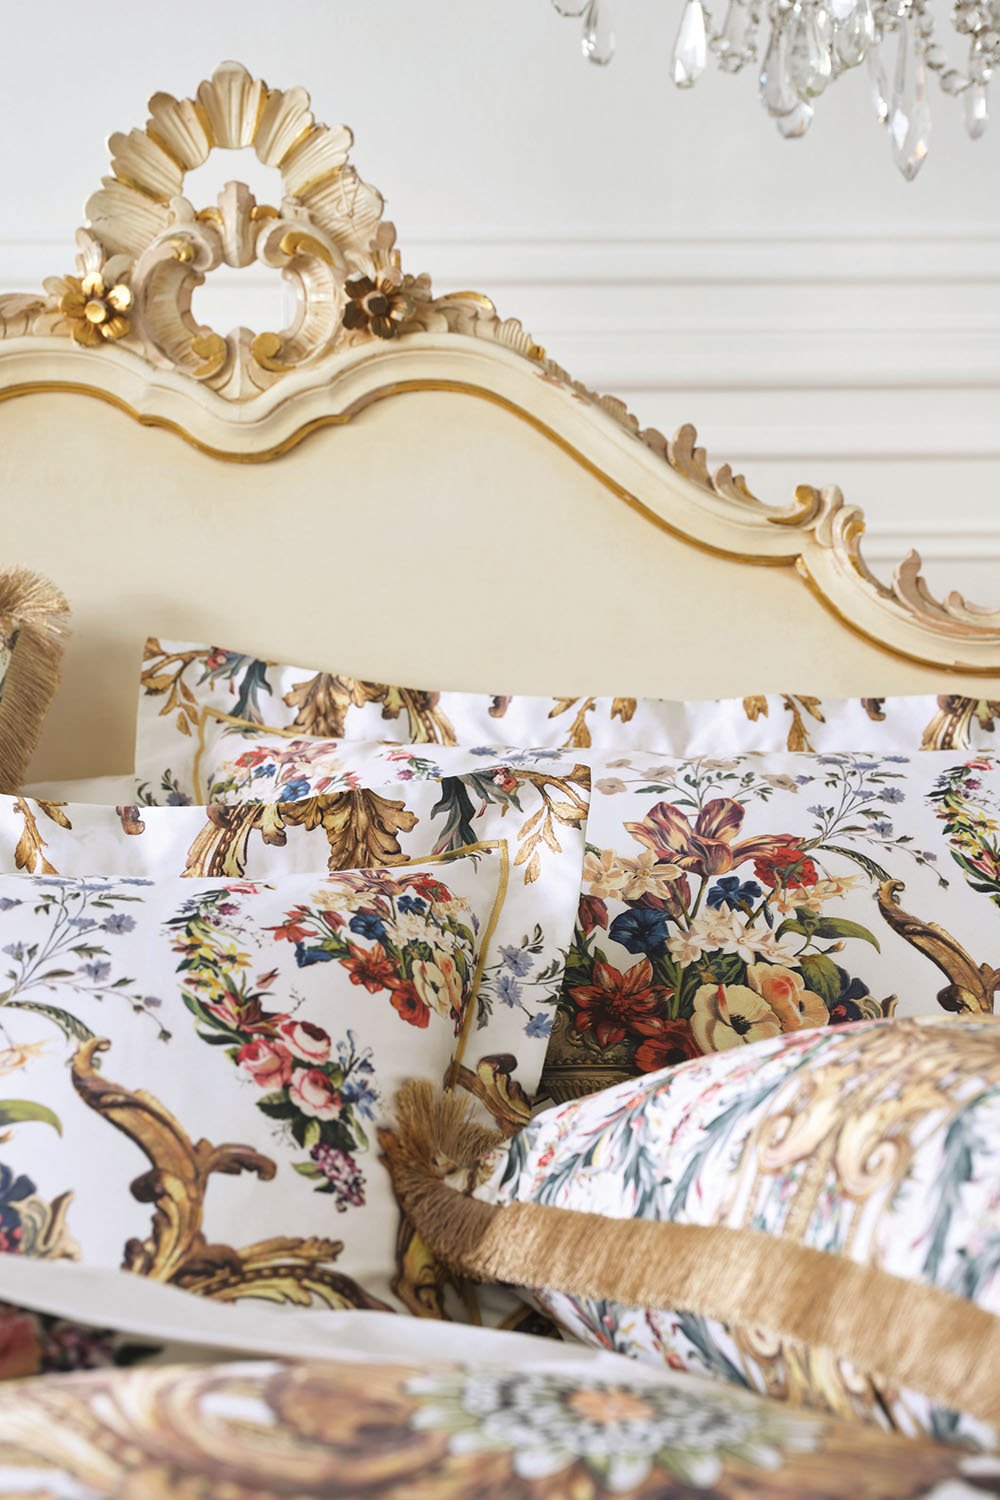 QUEEN BED QUILT COVER SET OLYMPE ODE